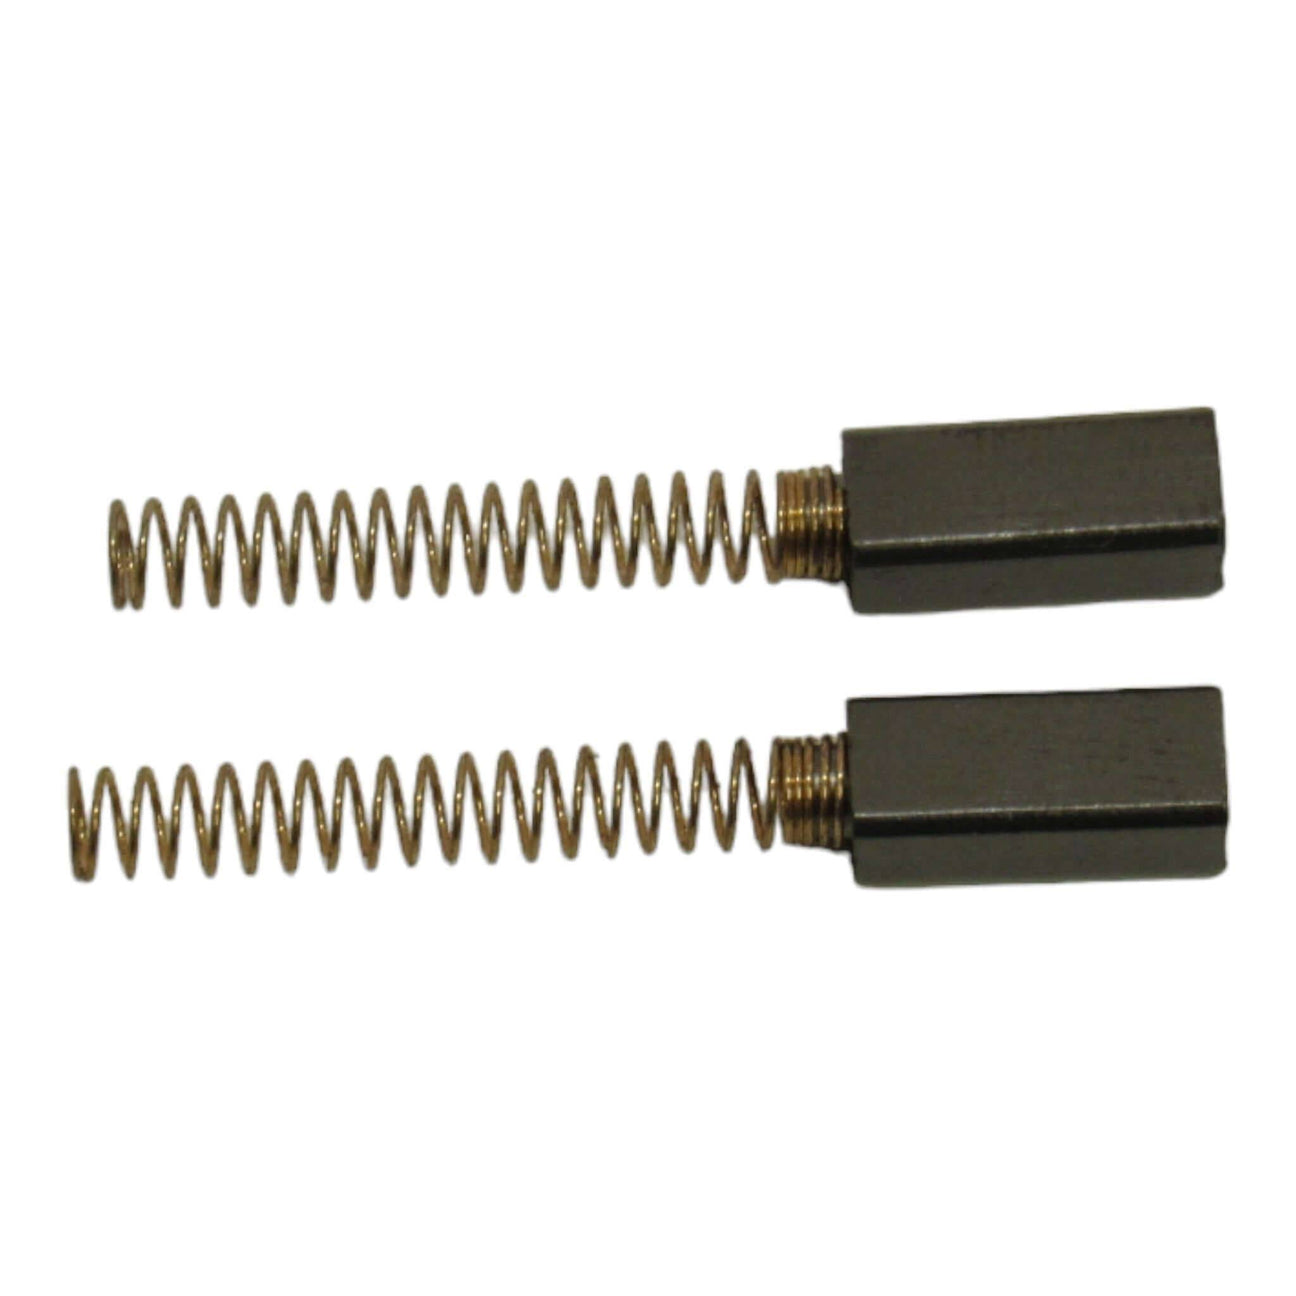 Carbon Motor Brushes for Sewing Machines